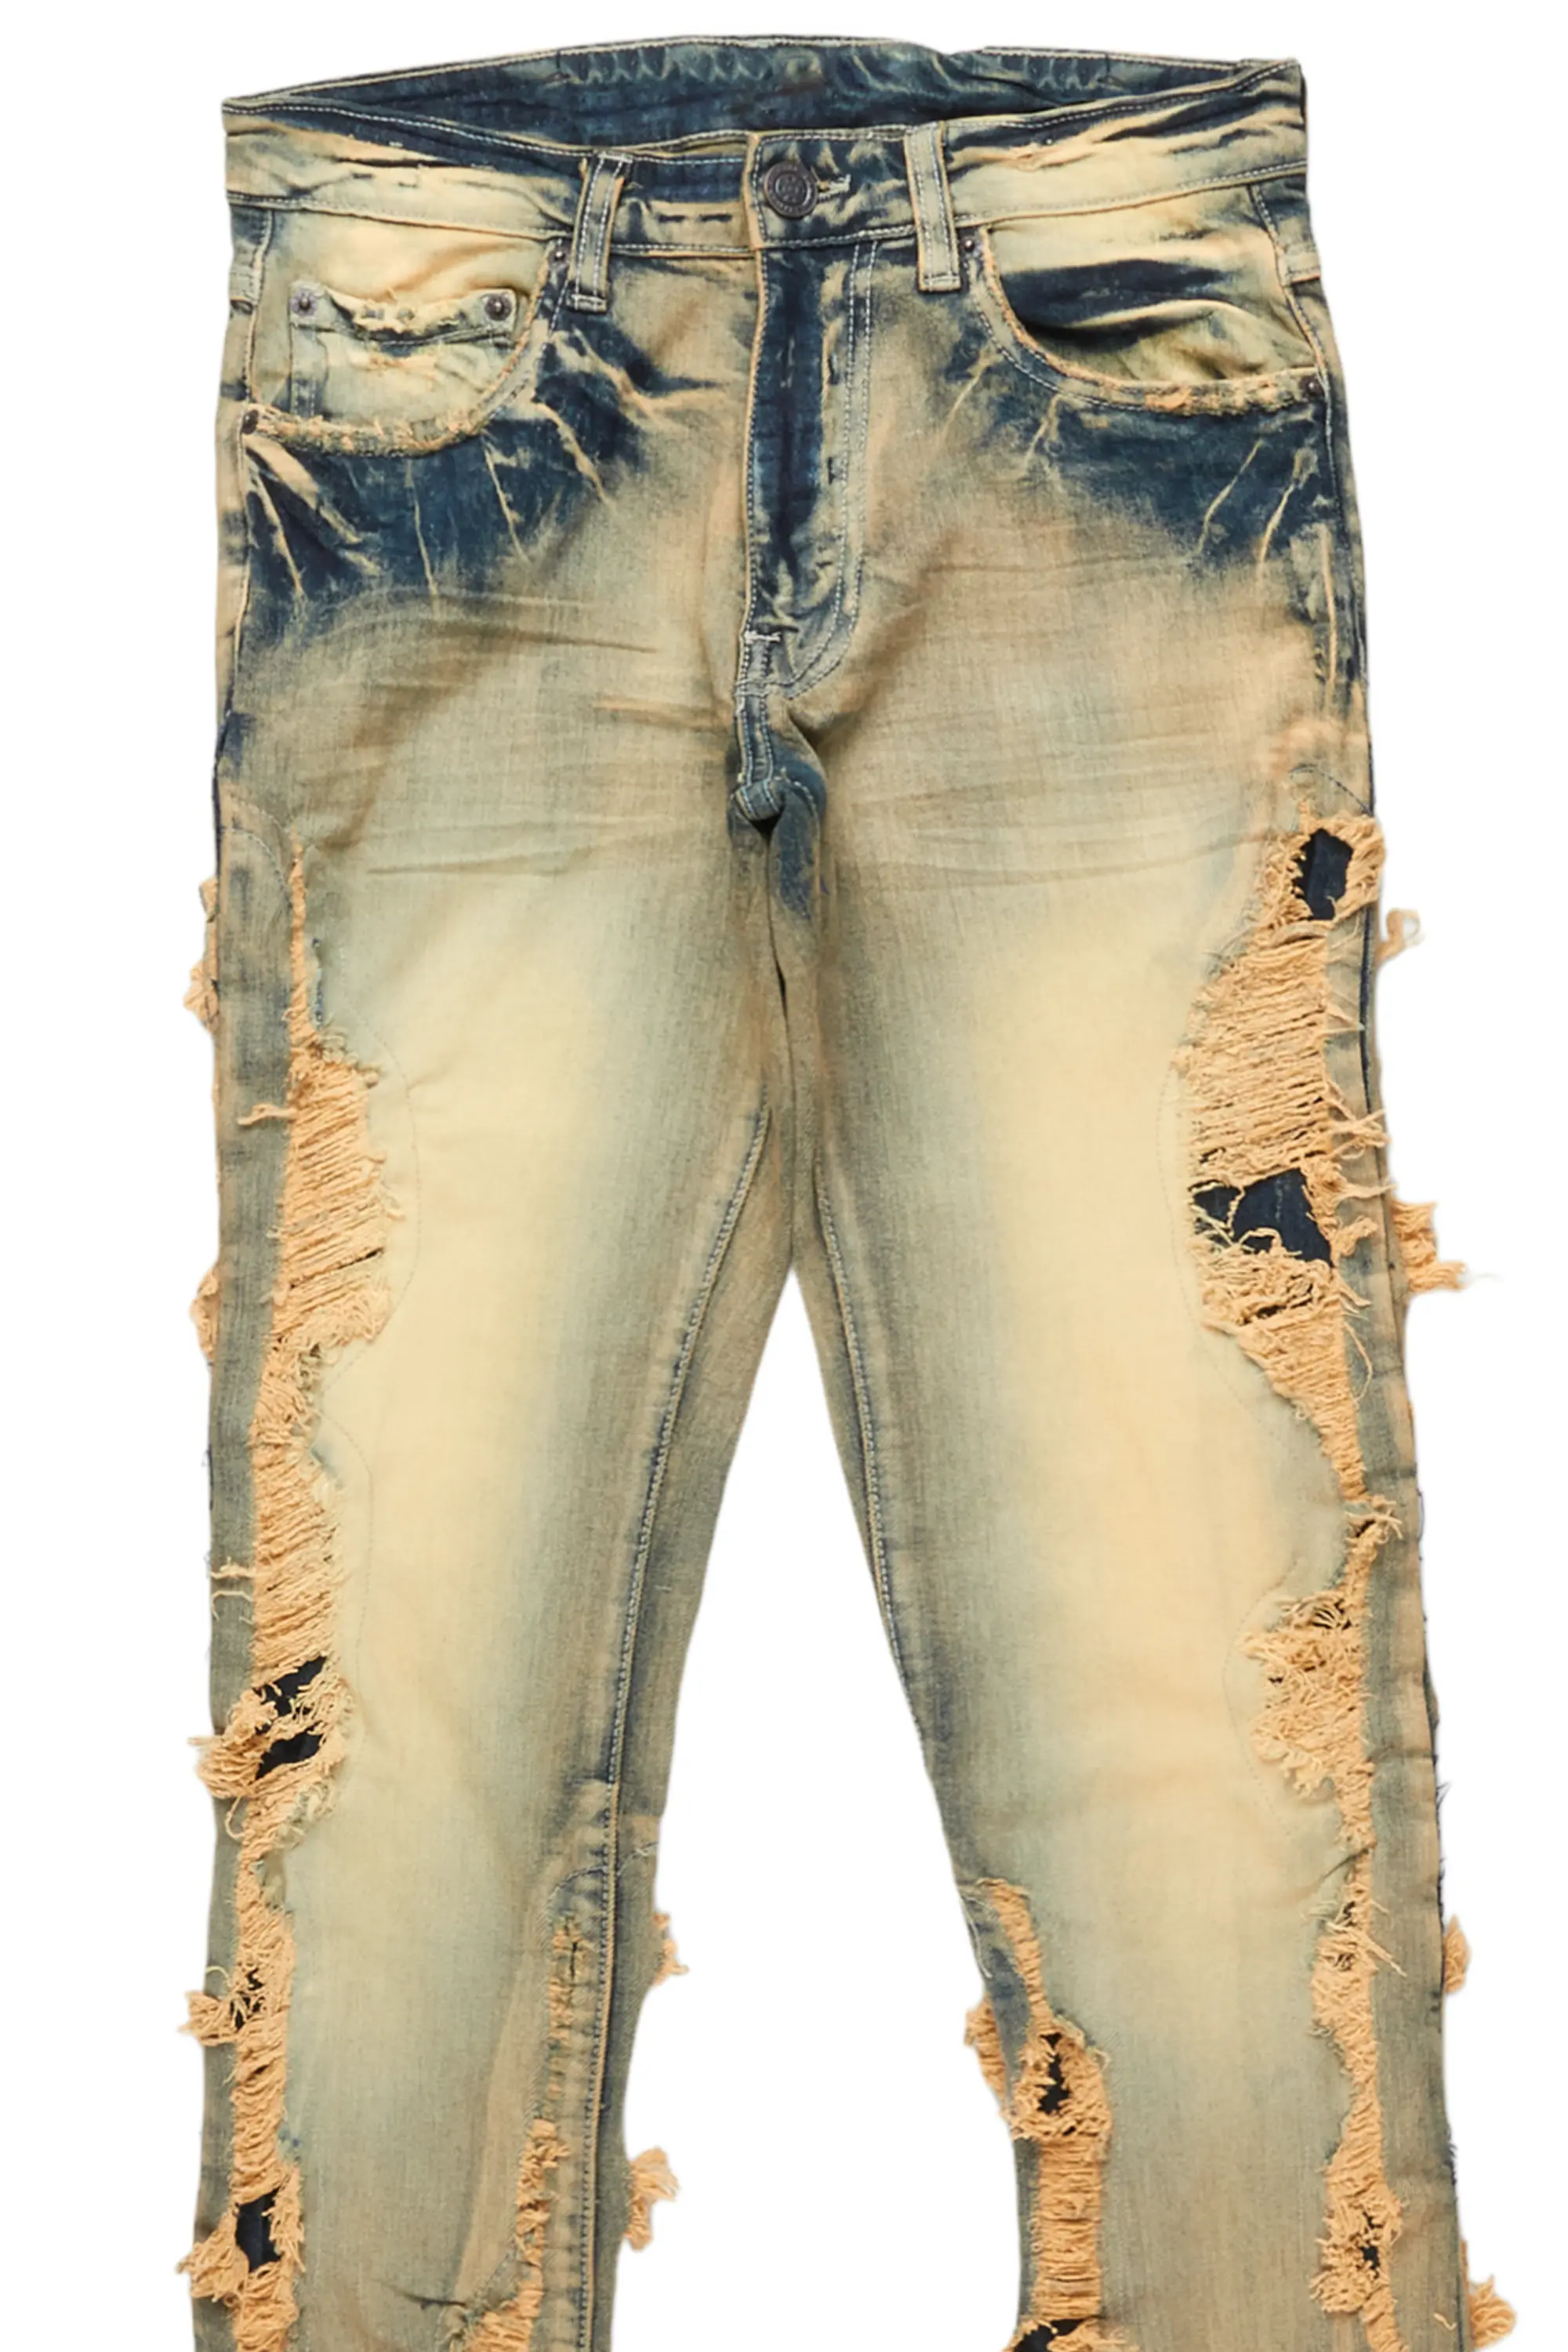 Spiro Taupe Stacked Flare Jean